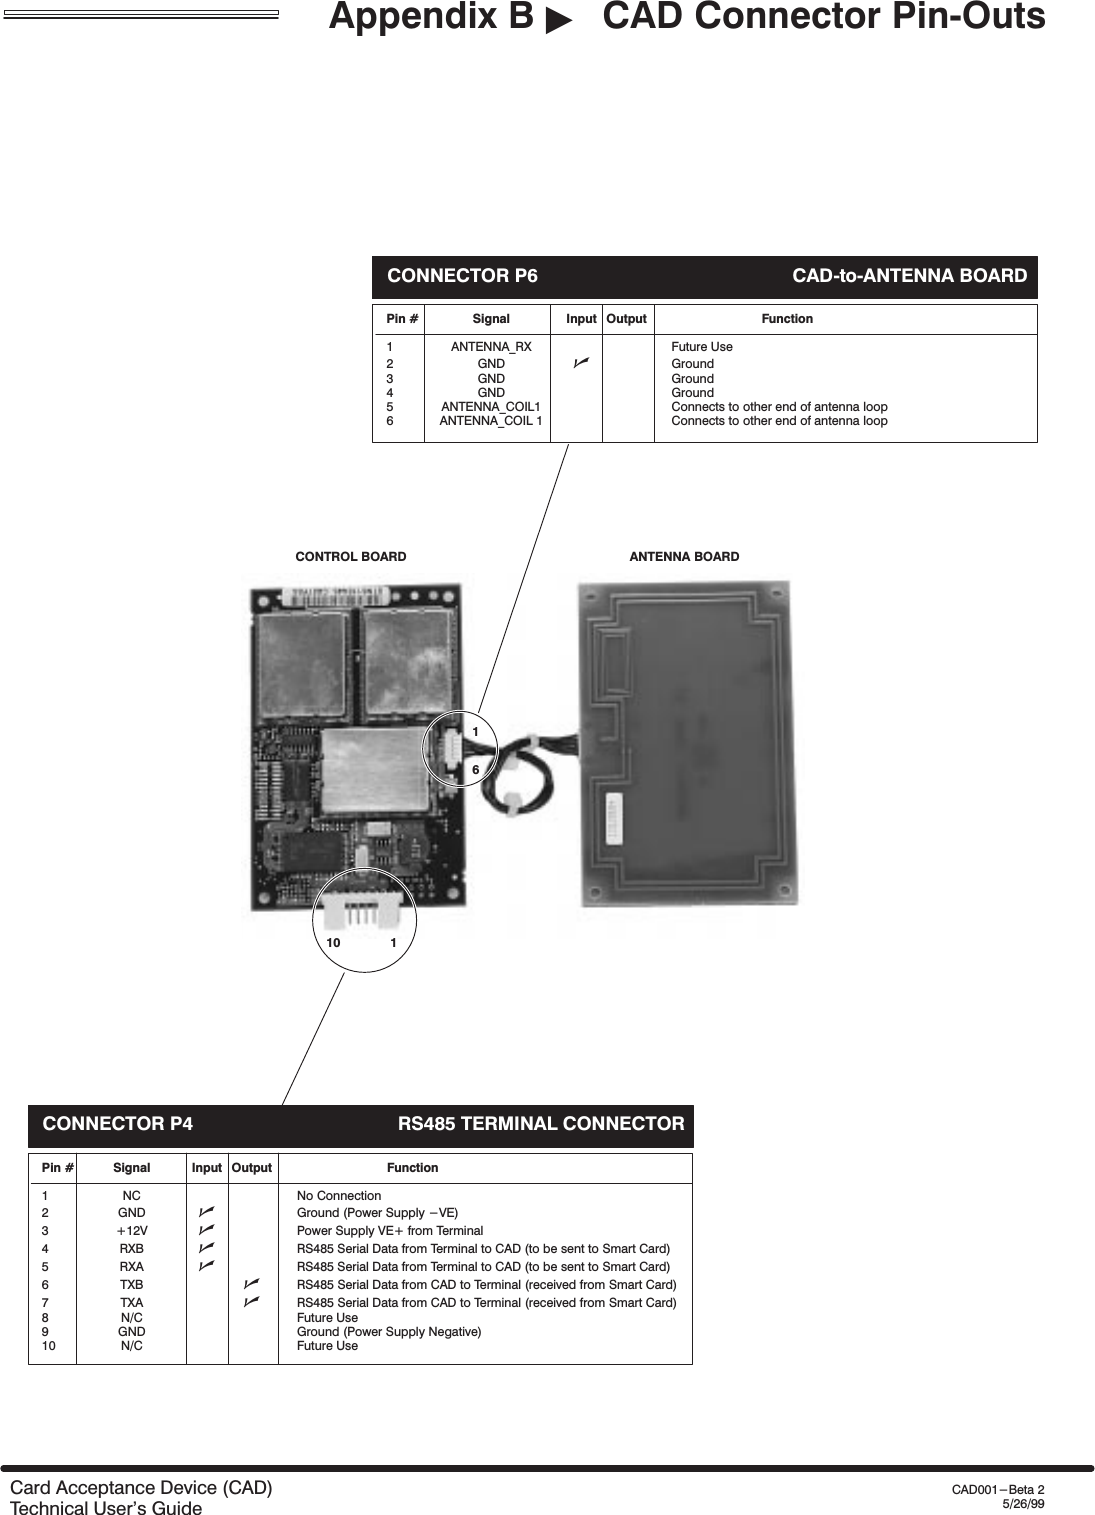 Appendix B &quot;CAD Connector PinĆOutsCard Acceptance Device (CAD)Technical User&apos;s GuideCAD001-Beta 25/26/99CONTROL BOARD ANTENNA BOARDCONNECTOR P4 RS485 TERMINAL CONNECTORPin # Signal Input Output Function1 NC No Connection2 GND nGround (Power Supply -VE)3 +12V nPower Supply VE+ from Terminal4 RXB nRS485 Serial Data from Terminal to CAD (to be sent to Smart Card)5 RXA nRS485 Serial Data from Terminal to CAD (to be sent to Smart Card)6TXB nRS485 Serial Data from CAD to Terminal (received from Smart Card)7TXA nRS485 Serial Data from CAD to Terminal (received from Smart Card)8 N/C Future Use9 GND Ground (Power Supply Negative)10 N/C Future UsePin # Signal Input Output Function1 ANTENNA_RX Future Use2 GND nGround3 GND Ground4 GND Ground5 ANTENNA_COIL1 Connects to other end of antenna loop6 ANTENNA_COIL 1 Connects to other end of antenna loopCONNECTOR P6 CADĆtoĆANTENNA BOARD11061